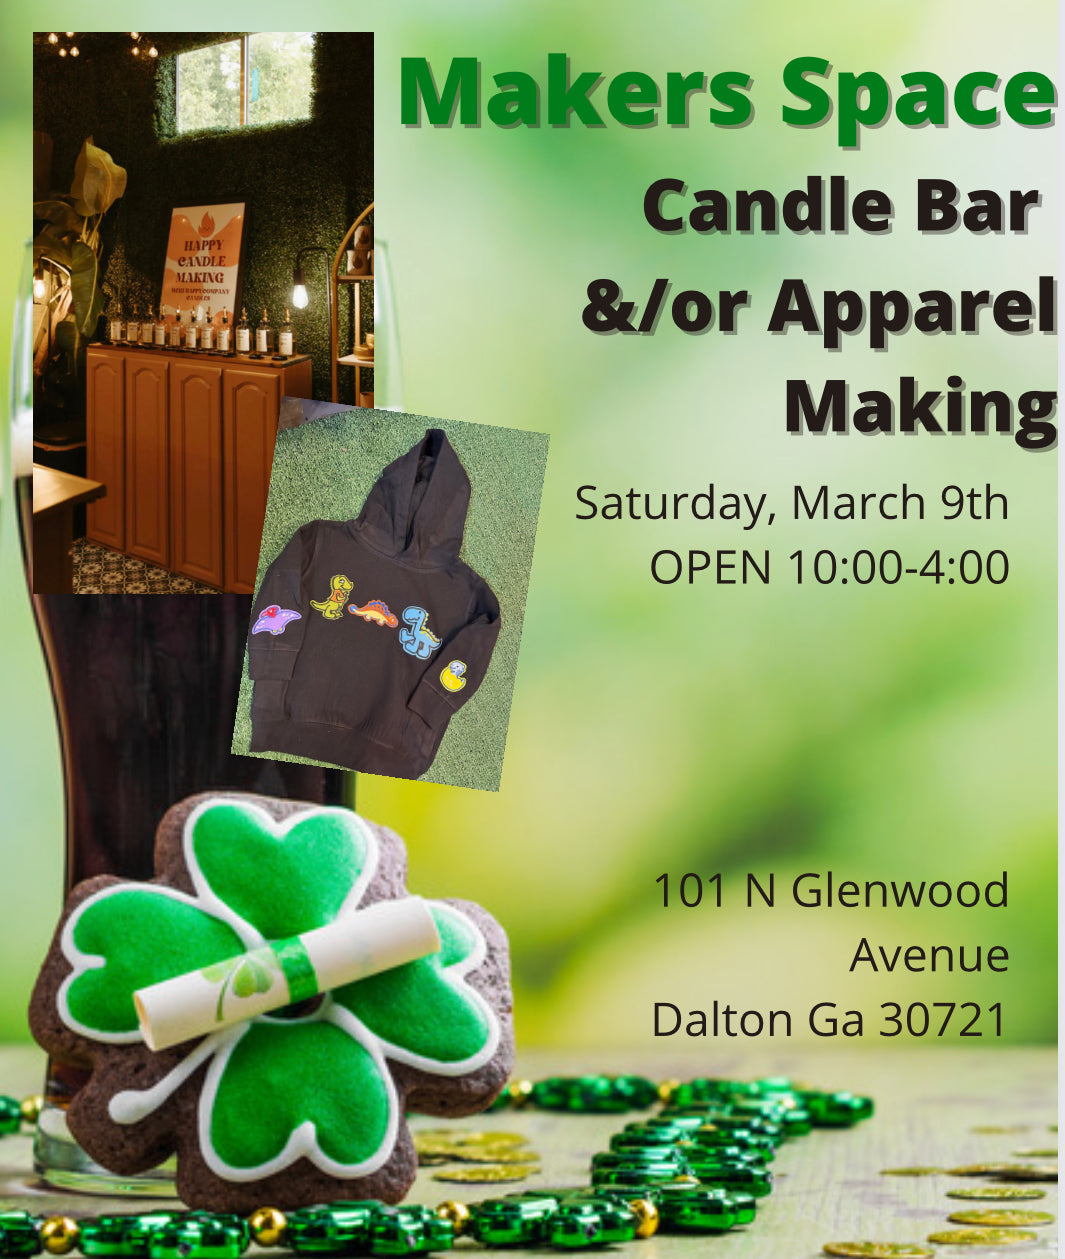 Makers Space (Candle Bar &/or Apparel Making) on Saturday 3/9